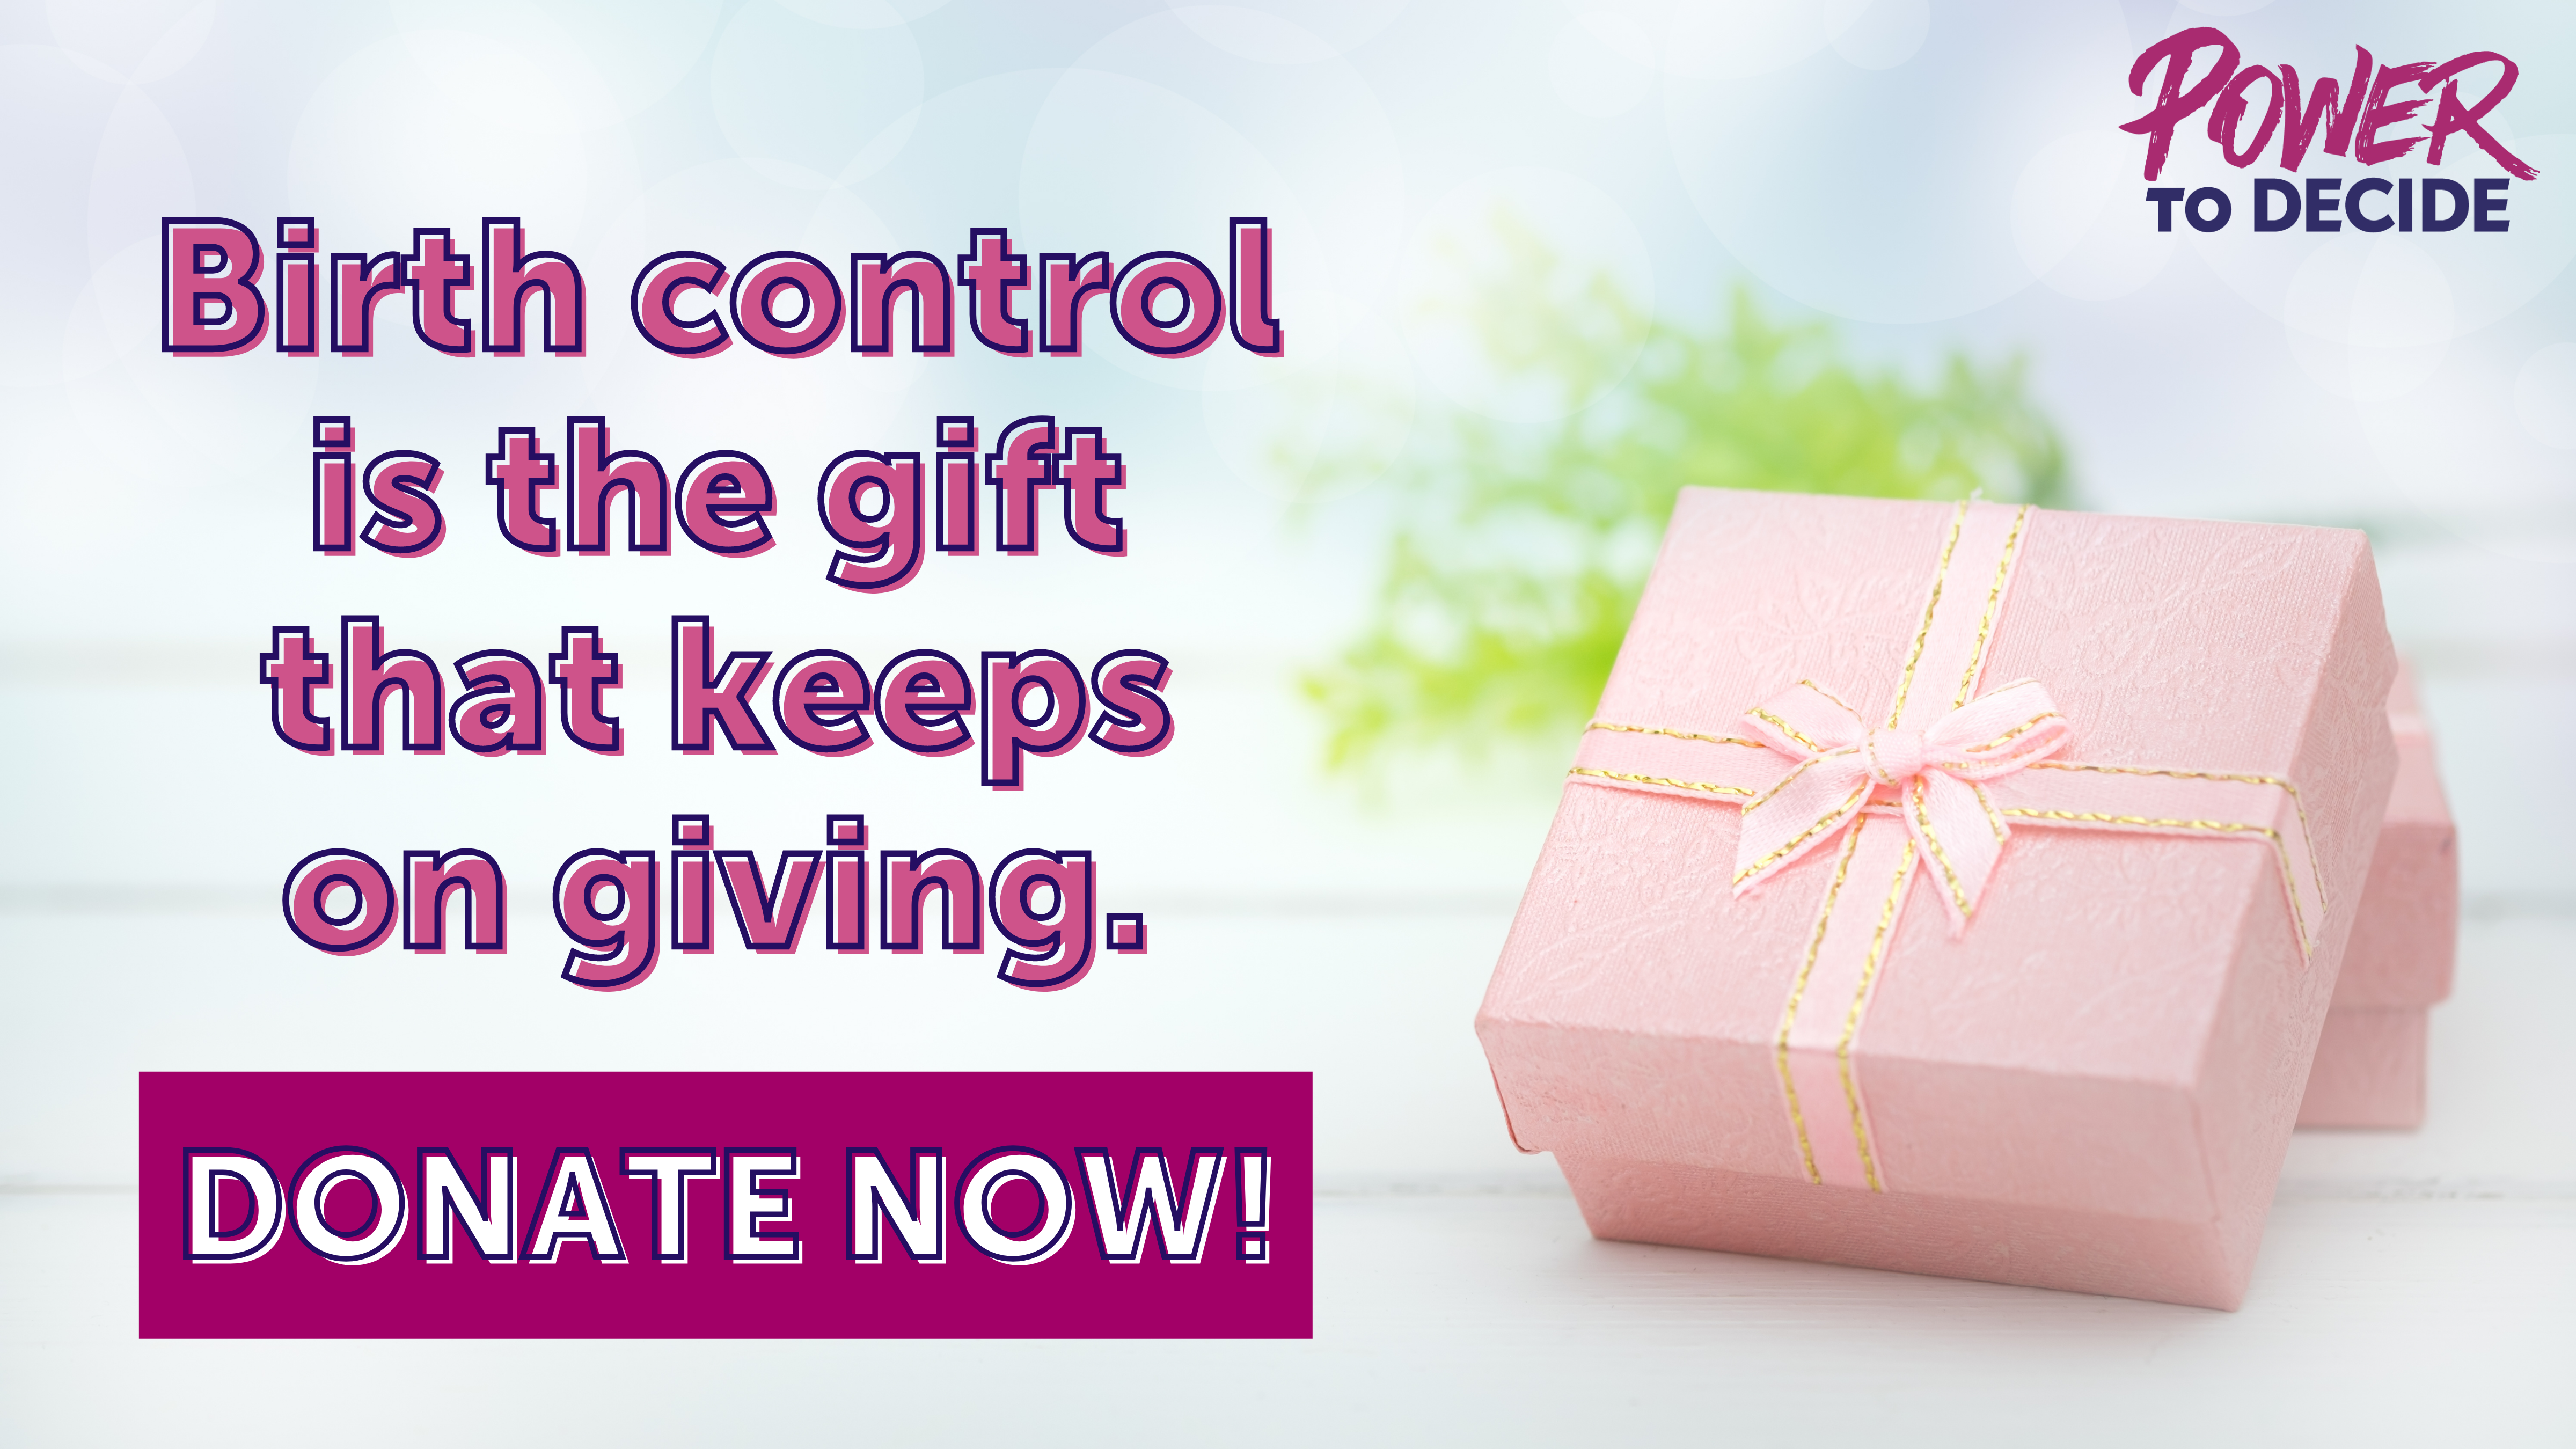 An image of a wrapped package next to the words, "Birth control is the gift that keeps on giving. Donate now!"